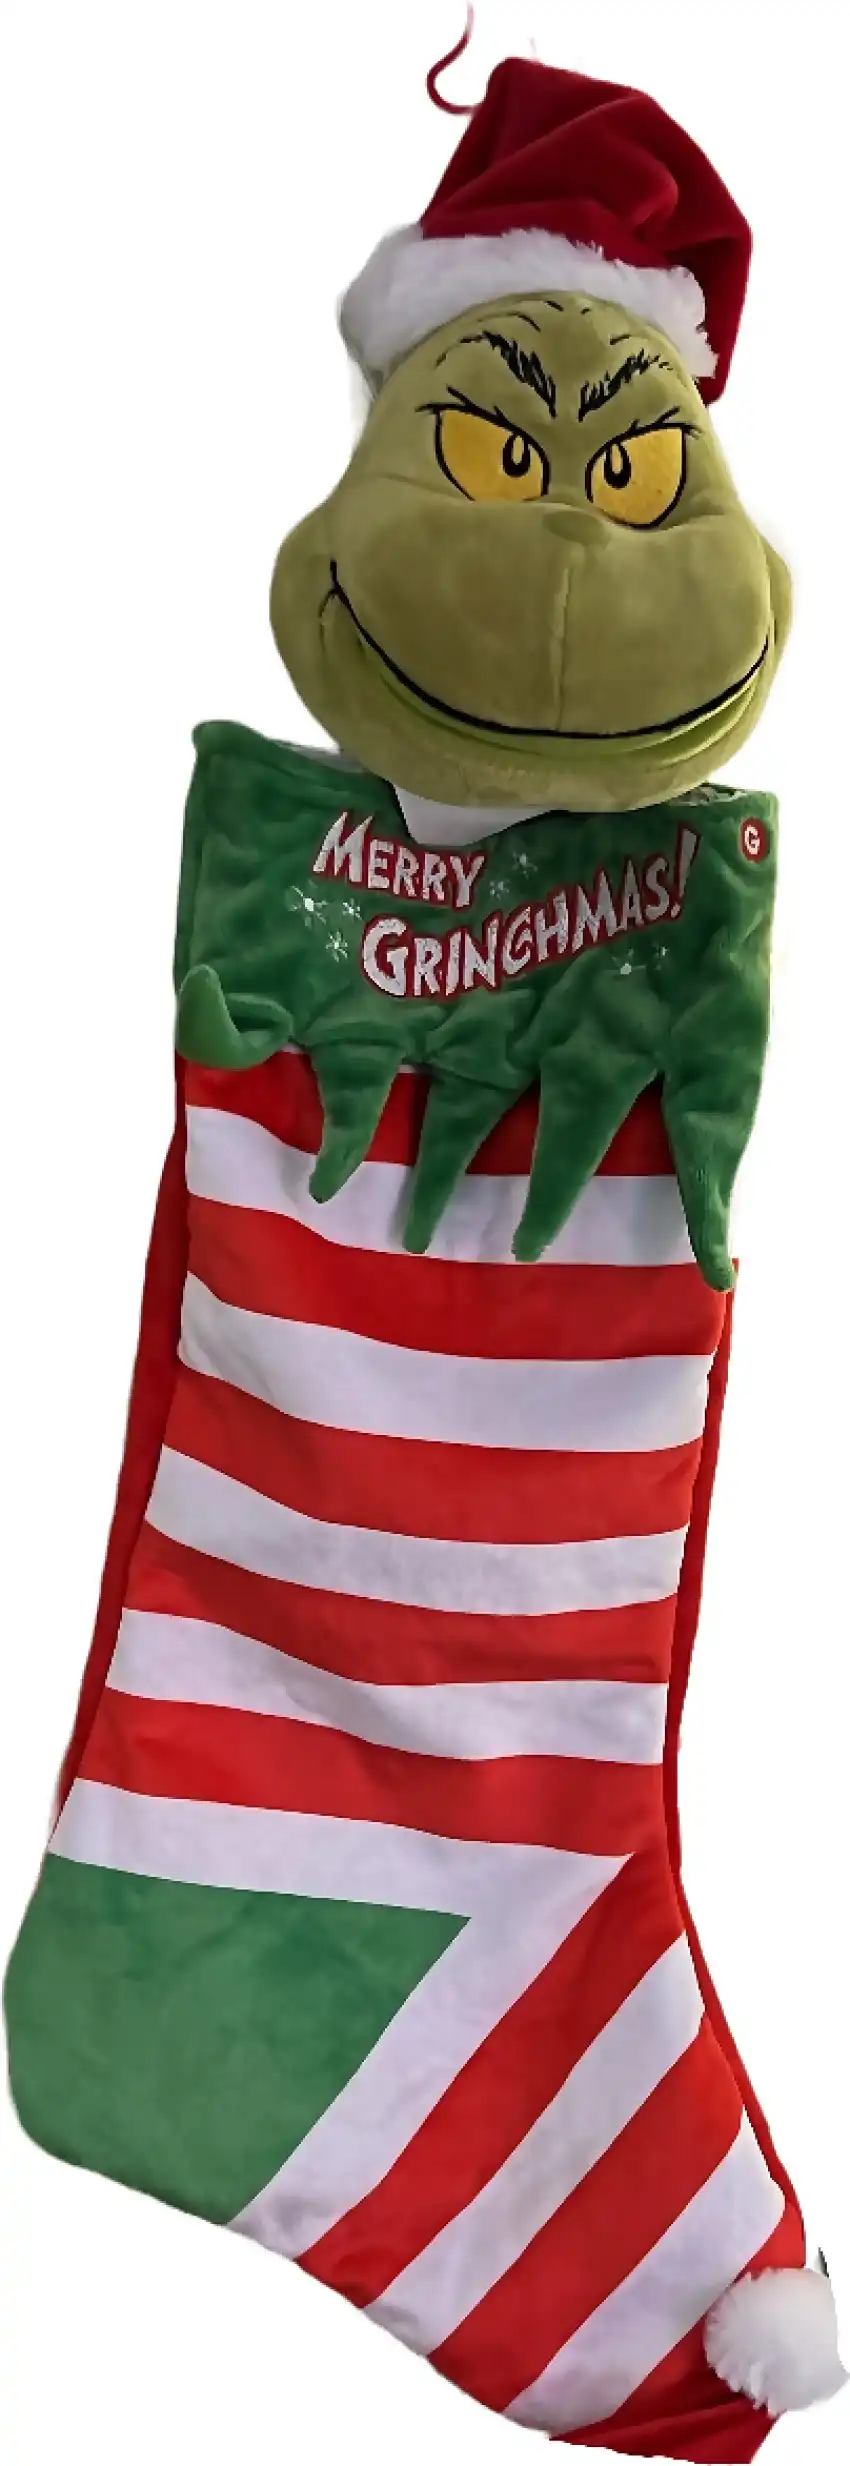 Cotton Candy - Xmas Animated Grinch Stocking 64cm - Dr. Seuss